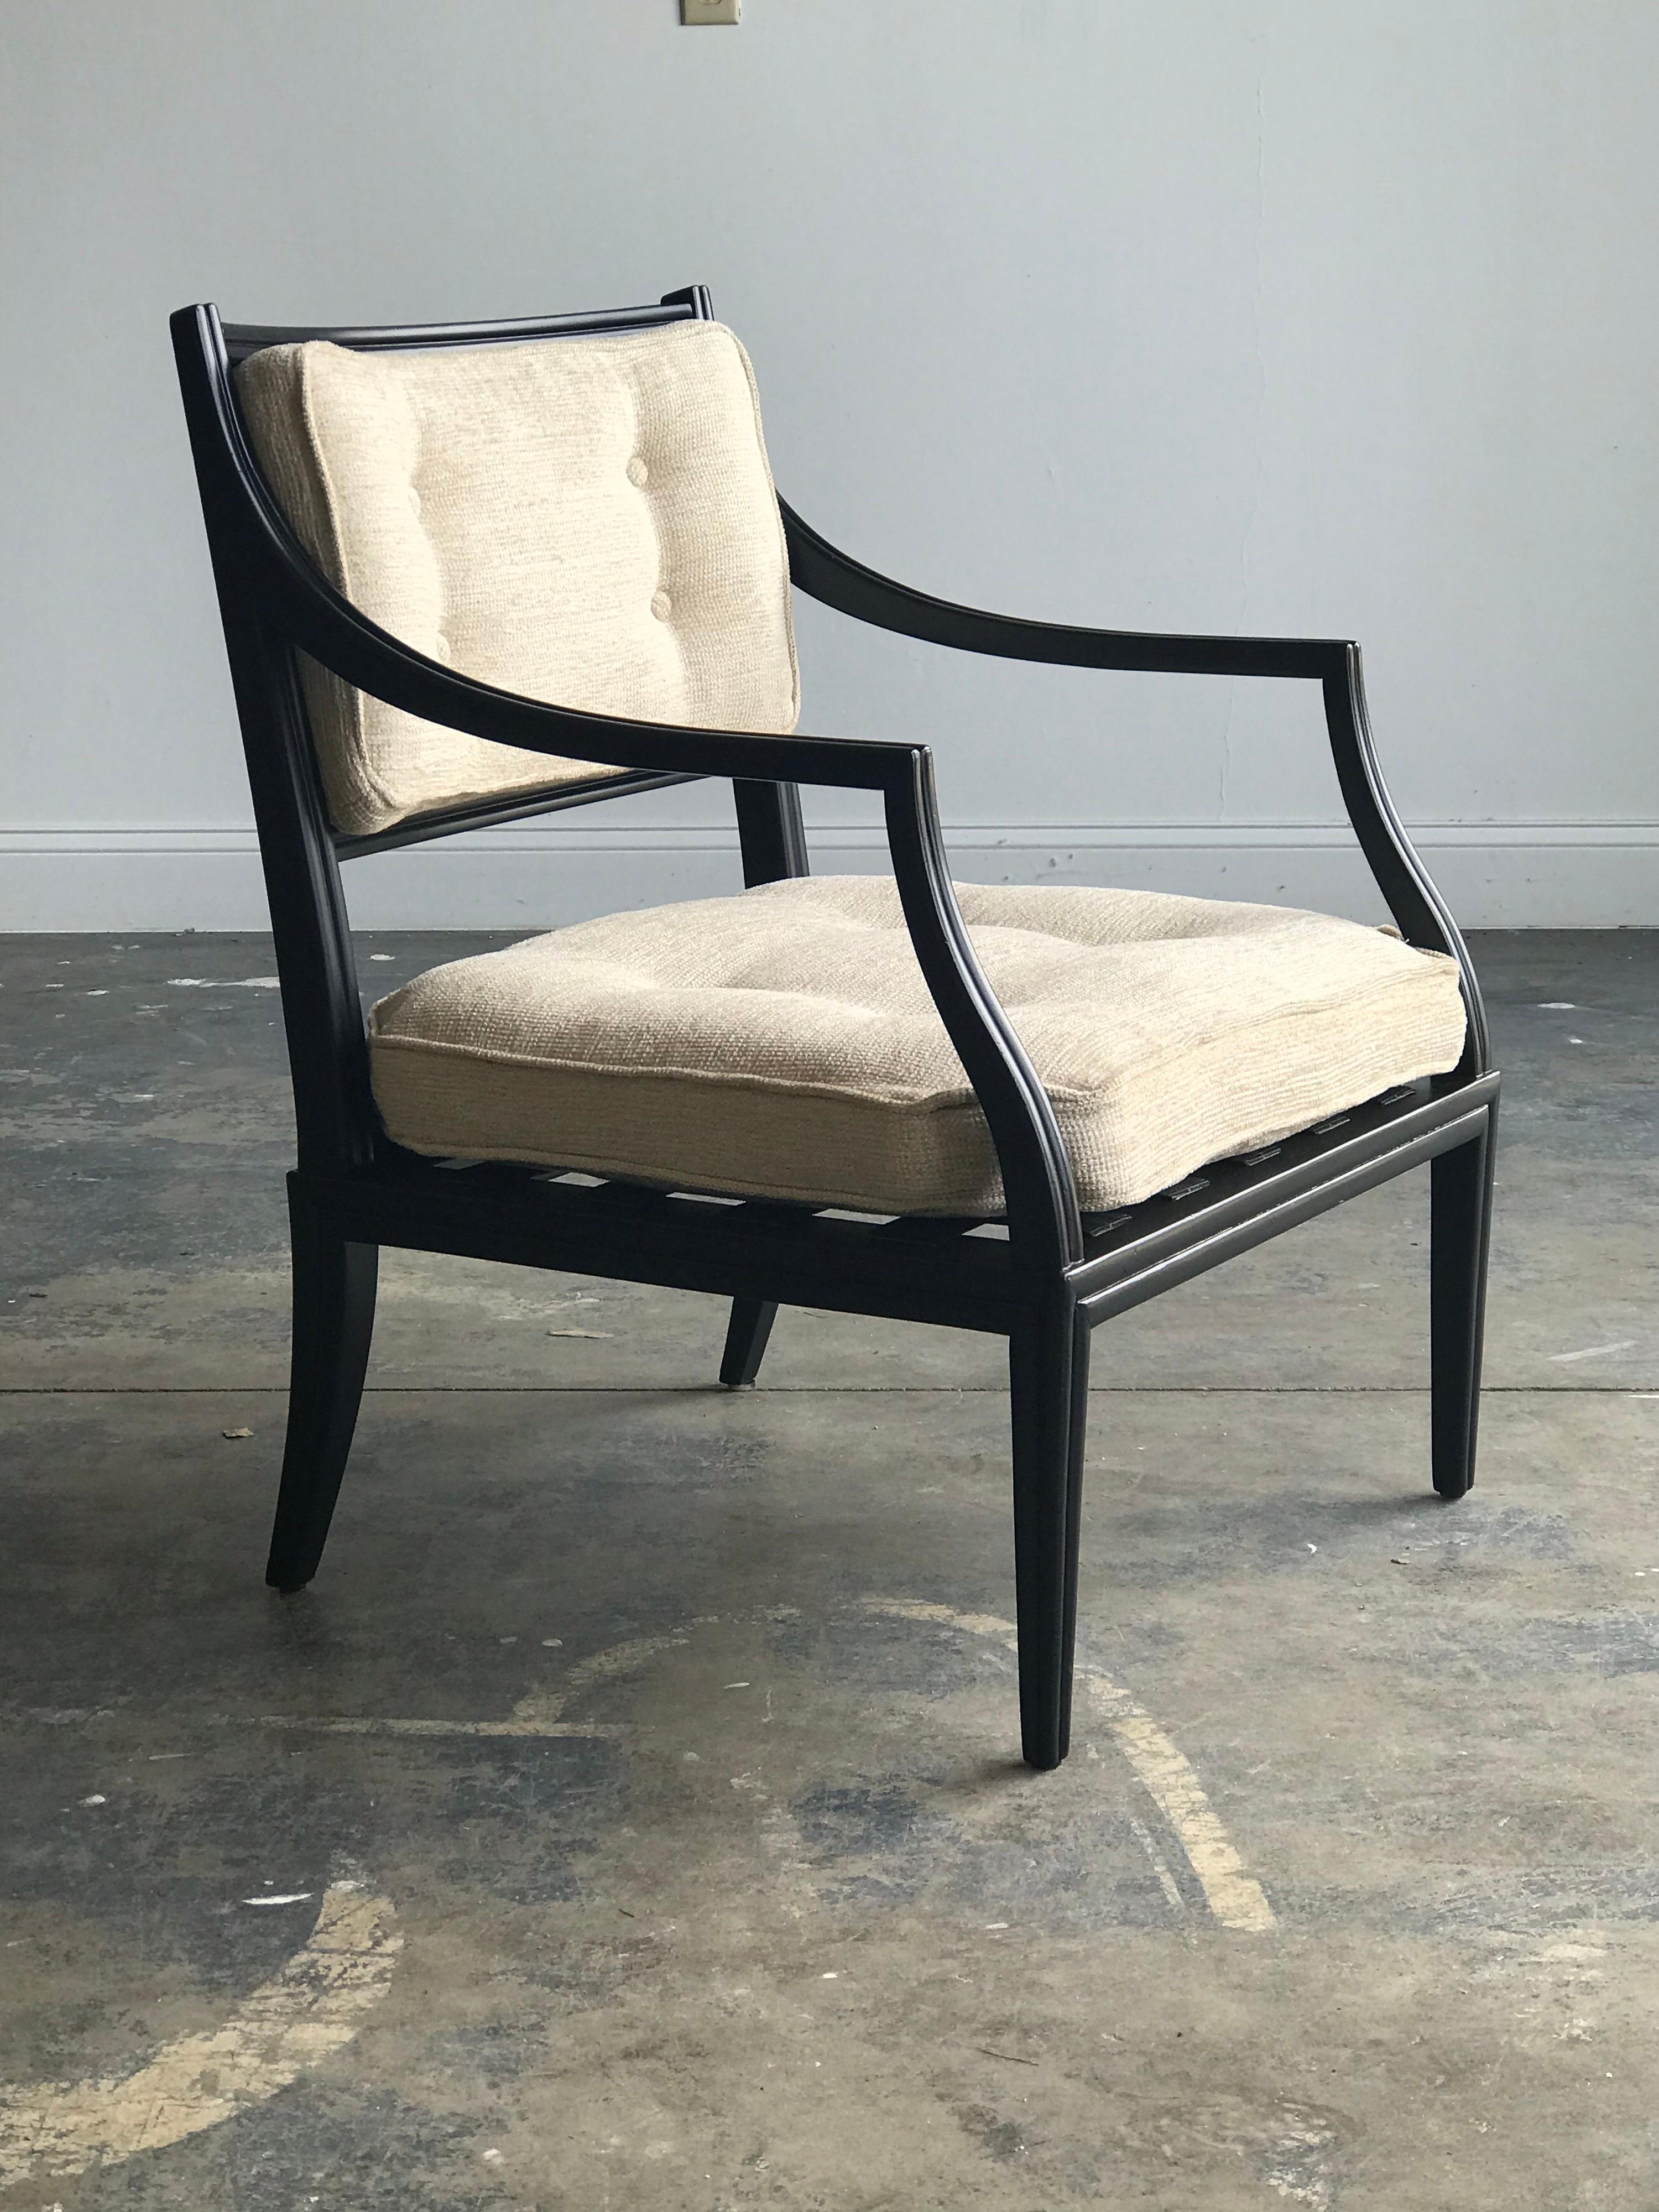 Unusual armchair by Edward Wormley for Dunbar. Graceful lines and stunning details. Ebonized frame with oatmeal/ beige upholstery. Model 6309.

Swatches available if needed.